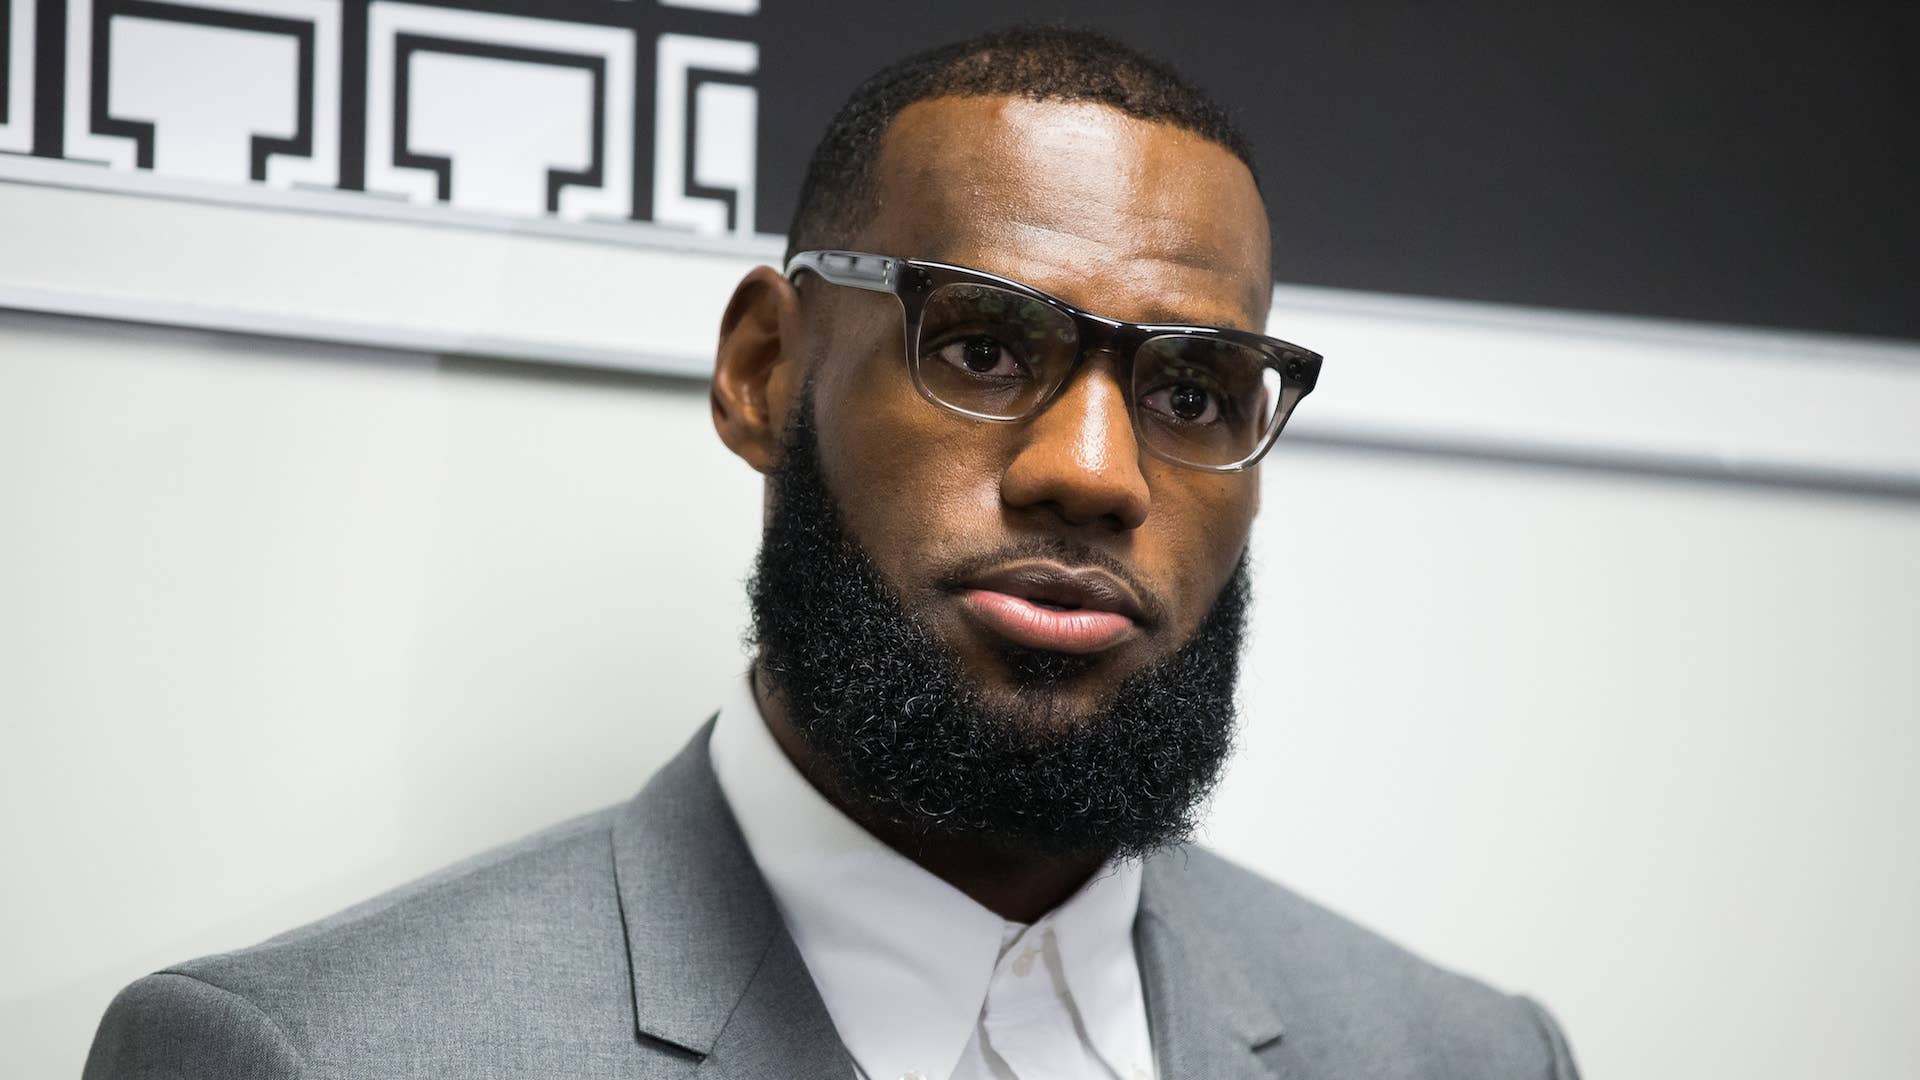 LeBron James addresses media following the grand opening of I Promise school.